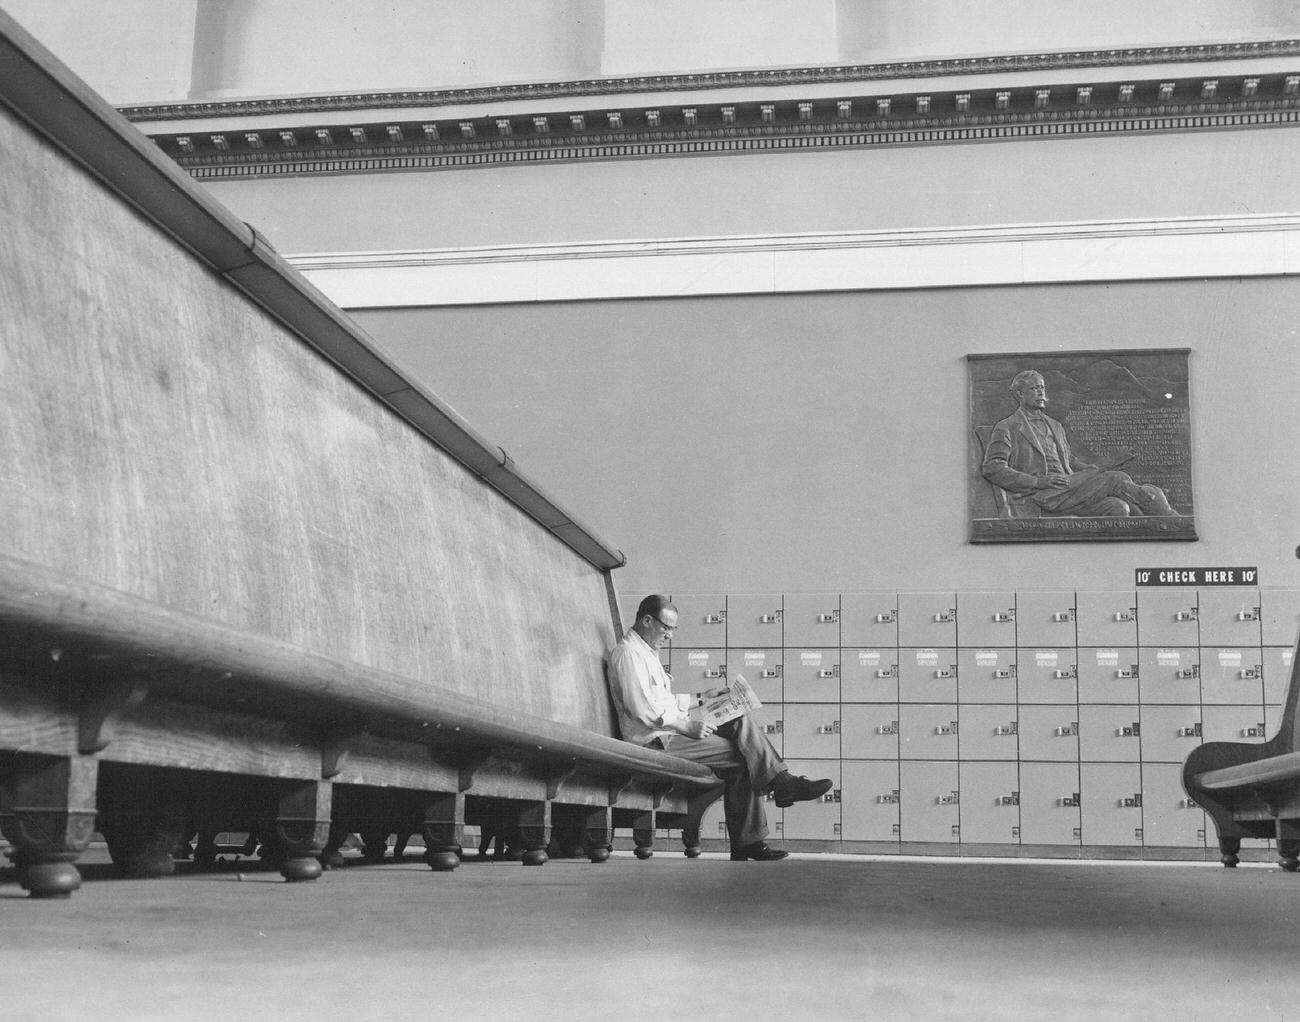 A lone traveler sitting in almost empty waiting room at Denver's union station, 1953